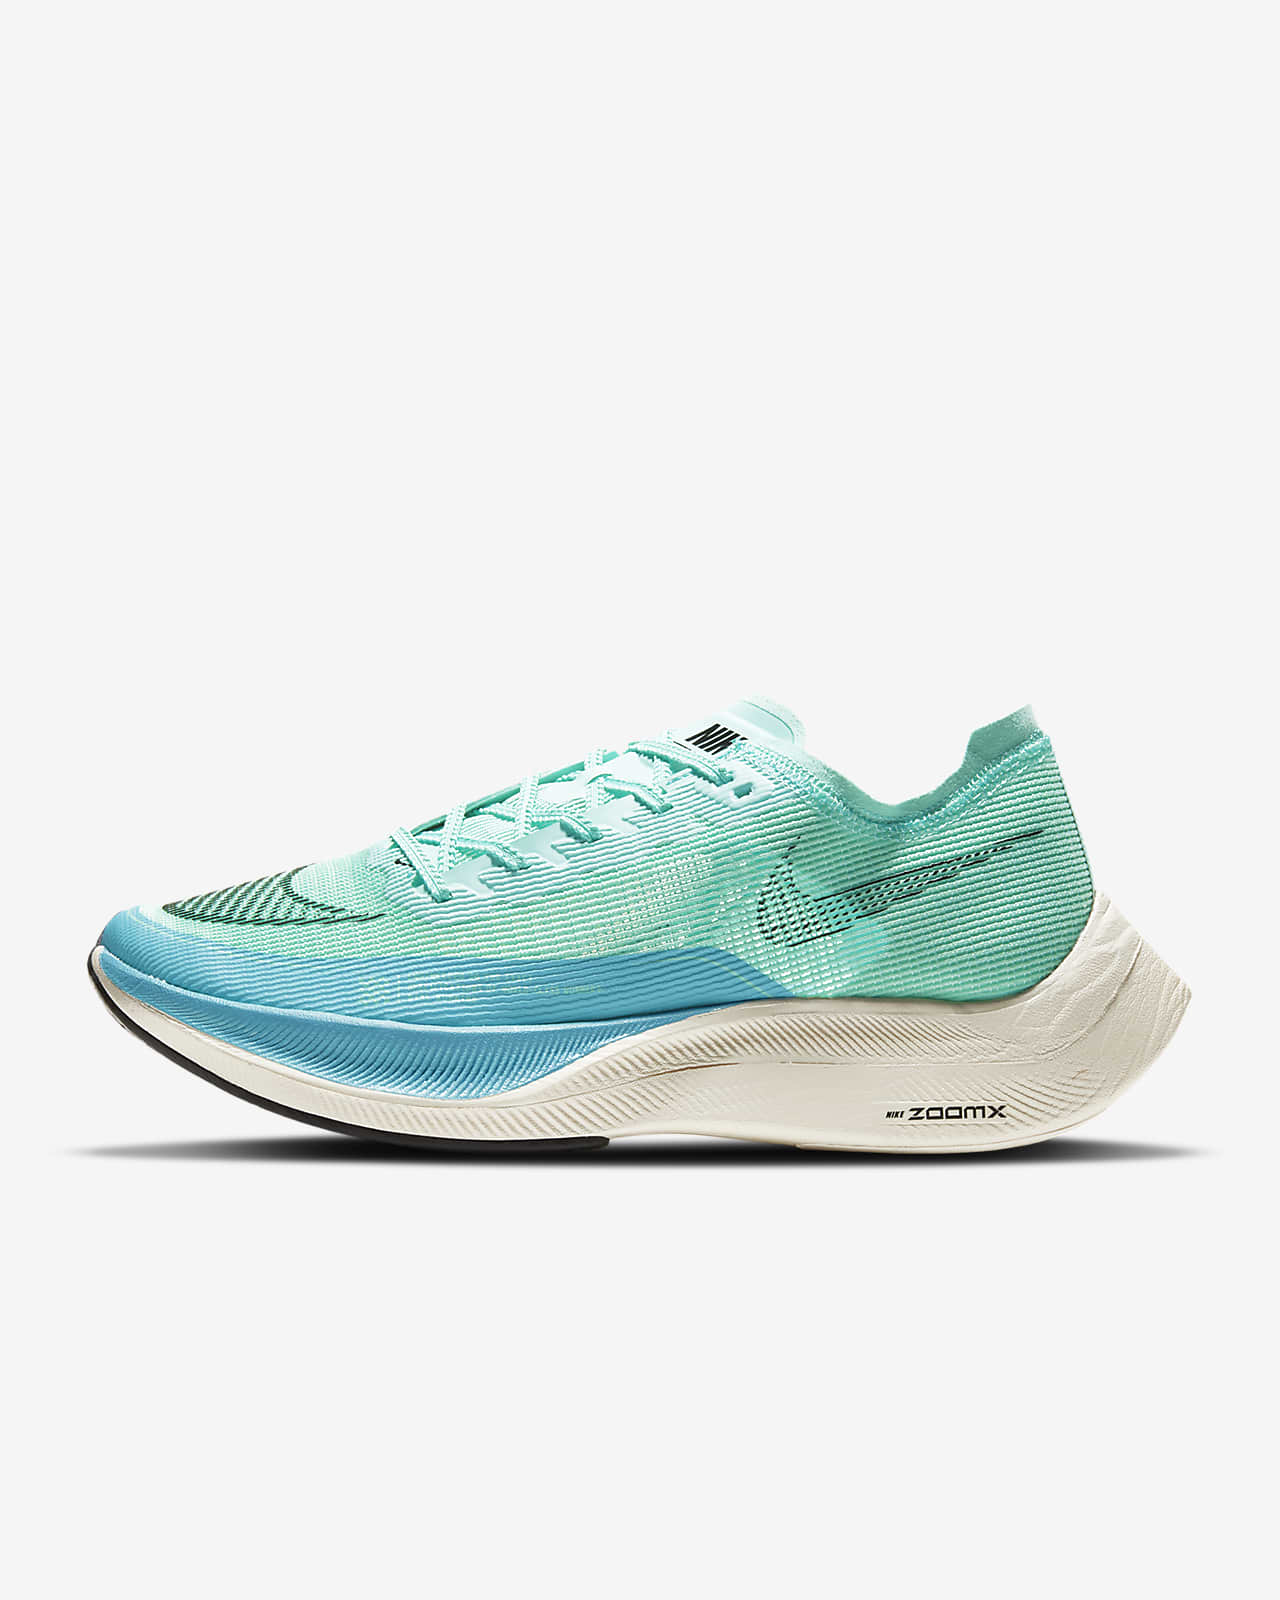 promising afternoon vein Nike Vaporfly Next Gen France, SAVE 33% - aveclumiere.com